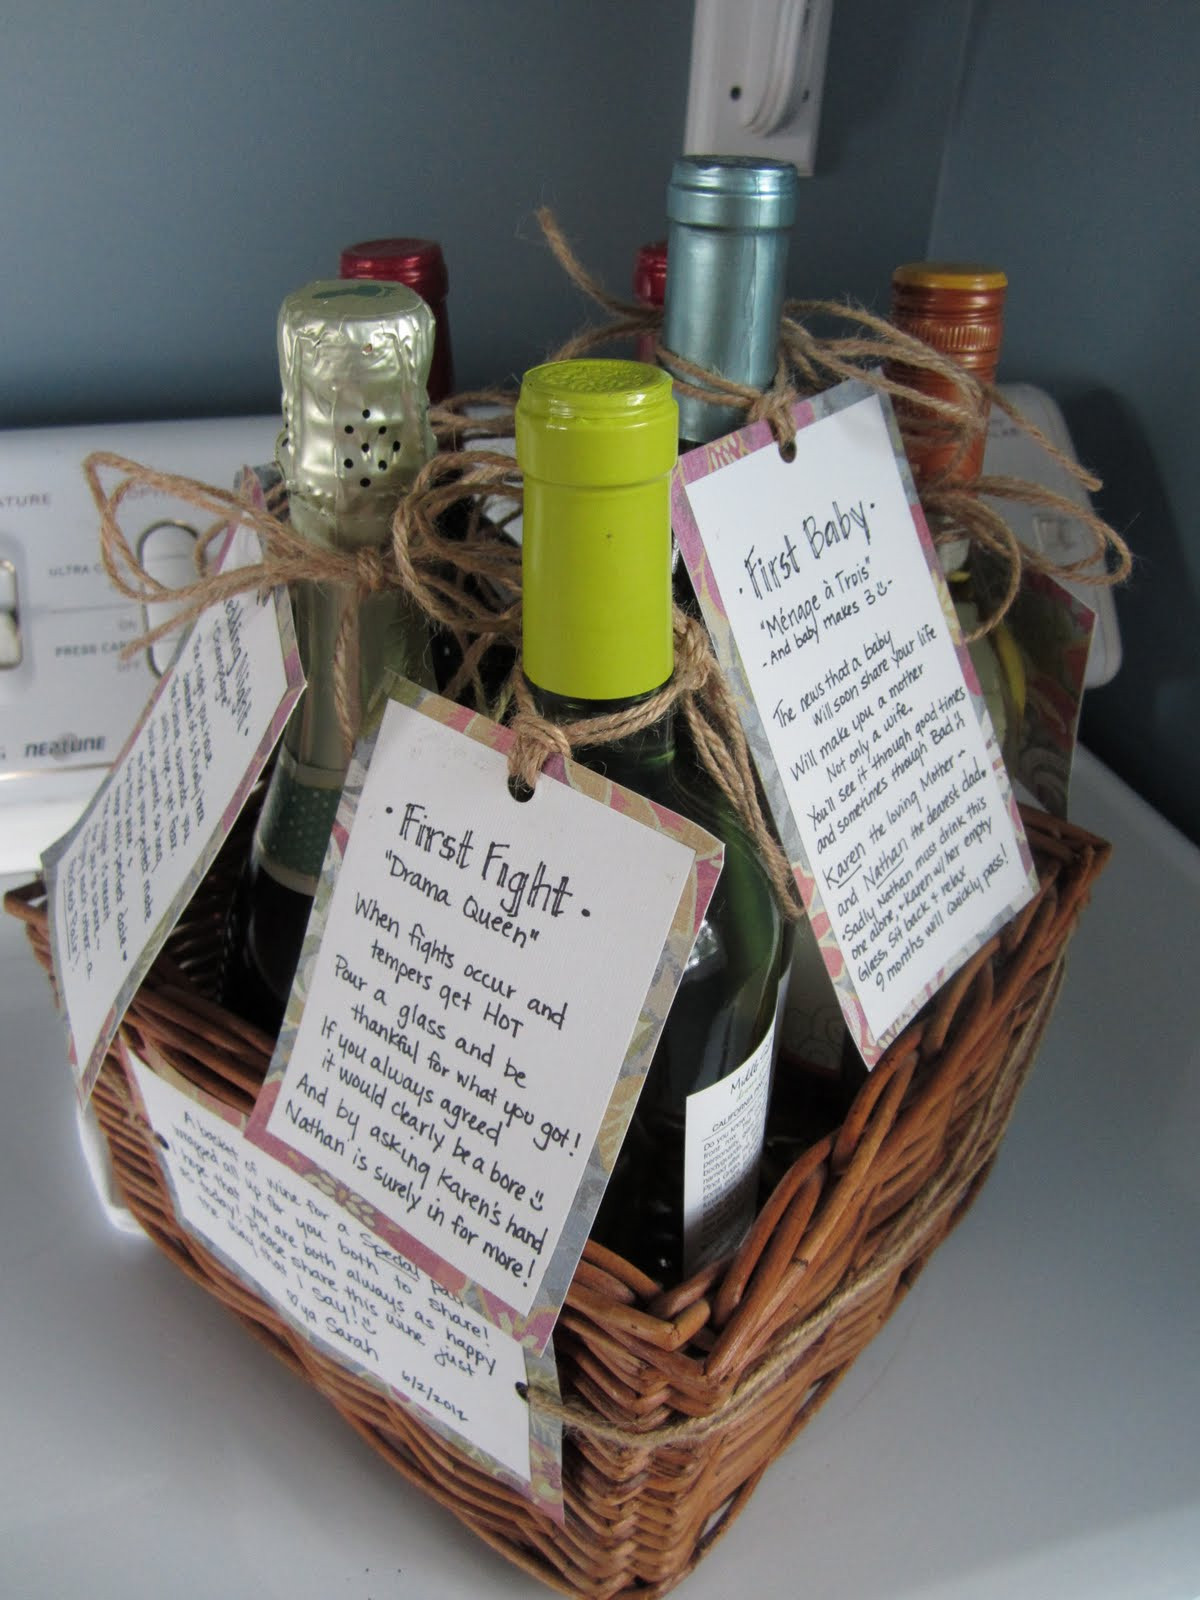 Ideas For Wedding Shower Gift
 5 Thoughtful Wedding Shower Gifts that Might Not Be on the